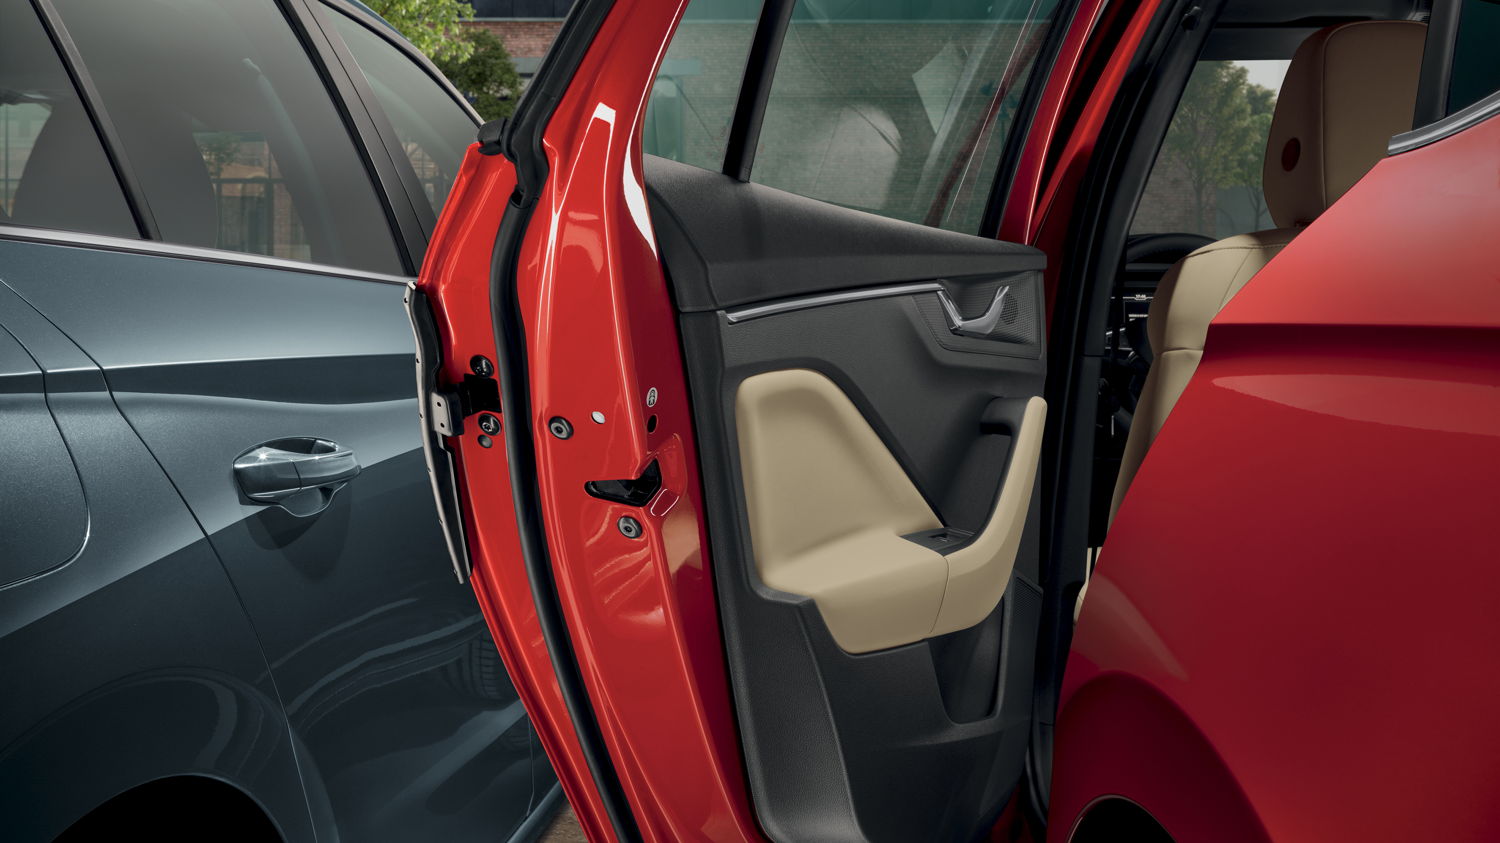 The KAMIQ is the first model in its segment to be available
with automatic door-edge protection, which protects the car
itself as well as vehicles parked next to it from dents and
scratches when opening the doors.